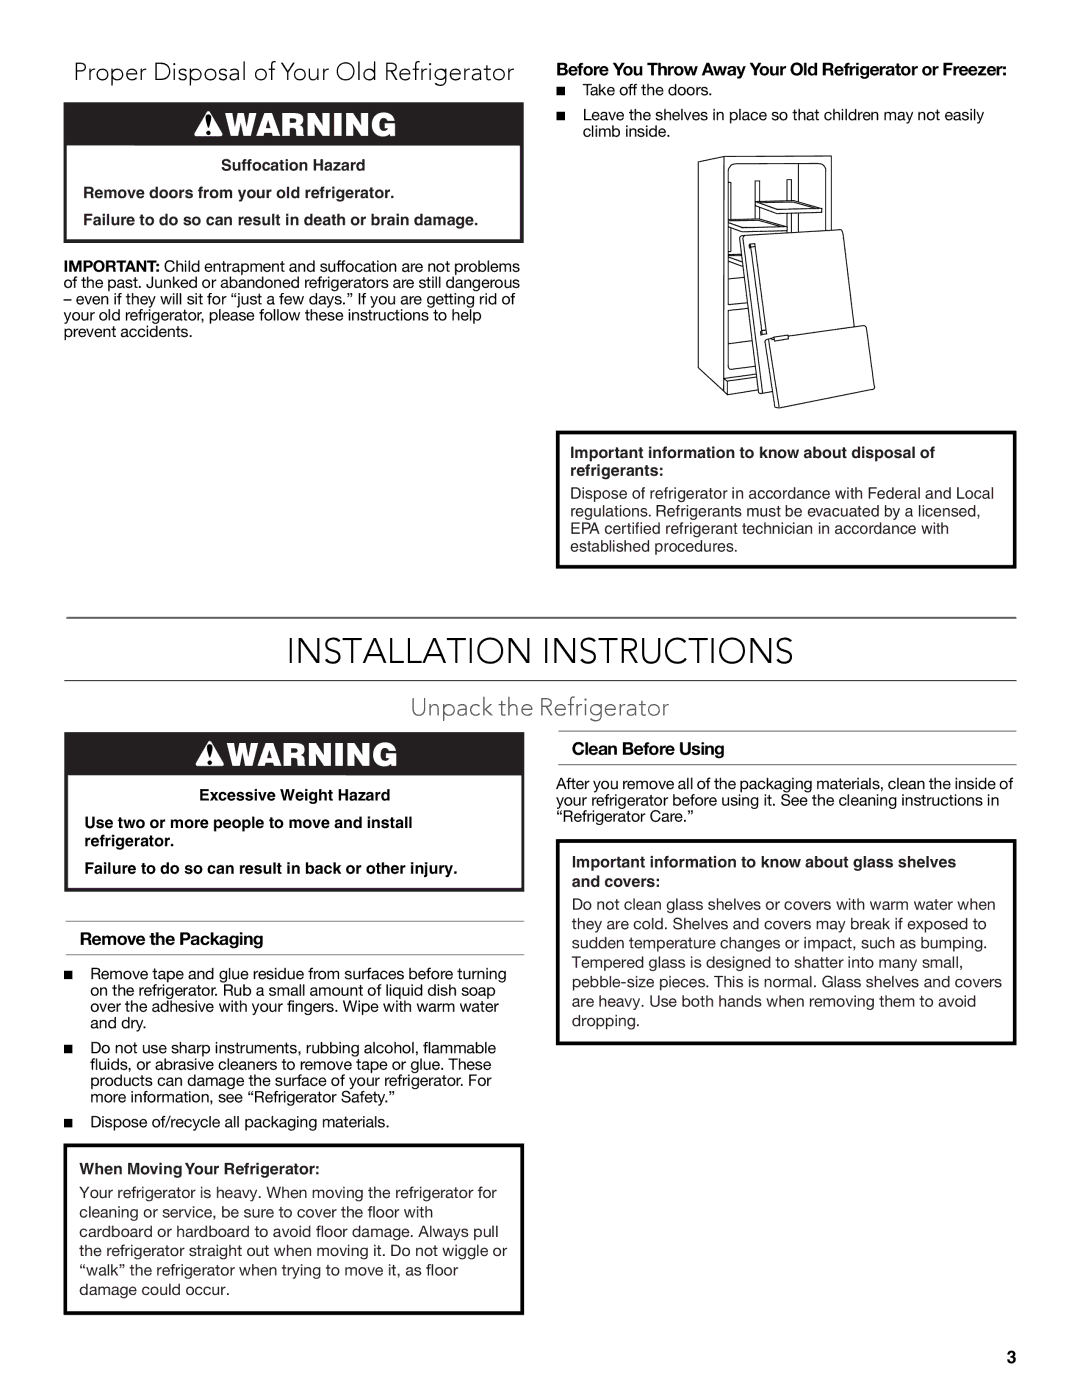 KitchenAid W10635370A Installation Instructions, Unpack the Refrigerator, Remove the Packaging, Clean Before Using 